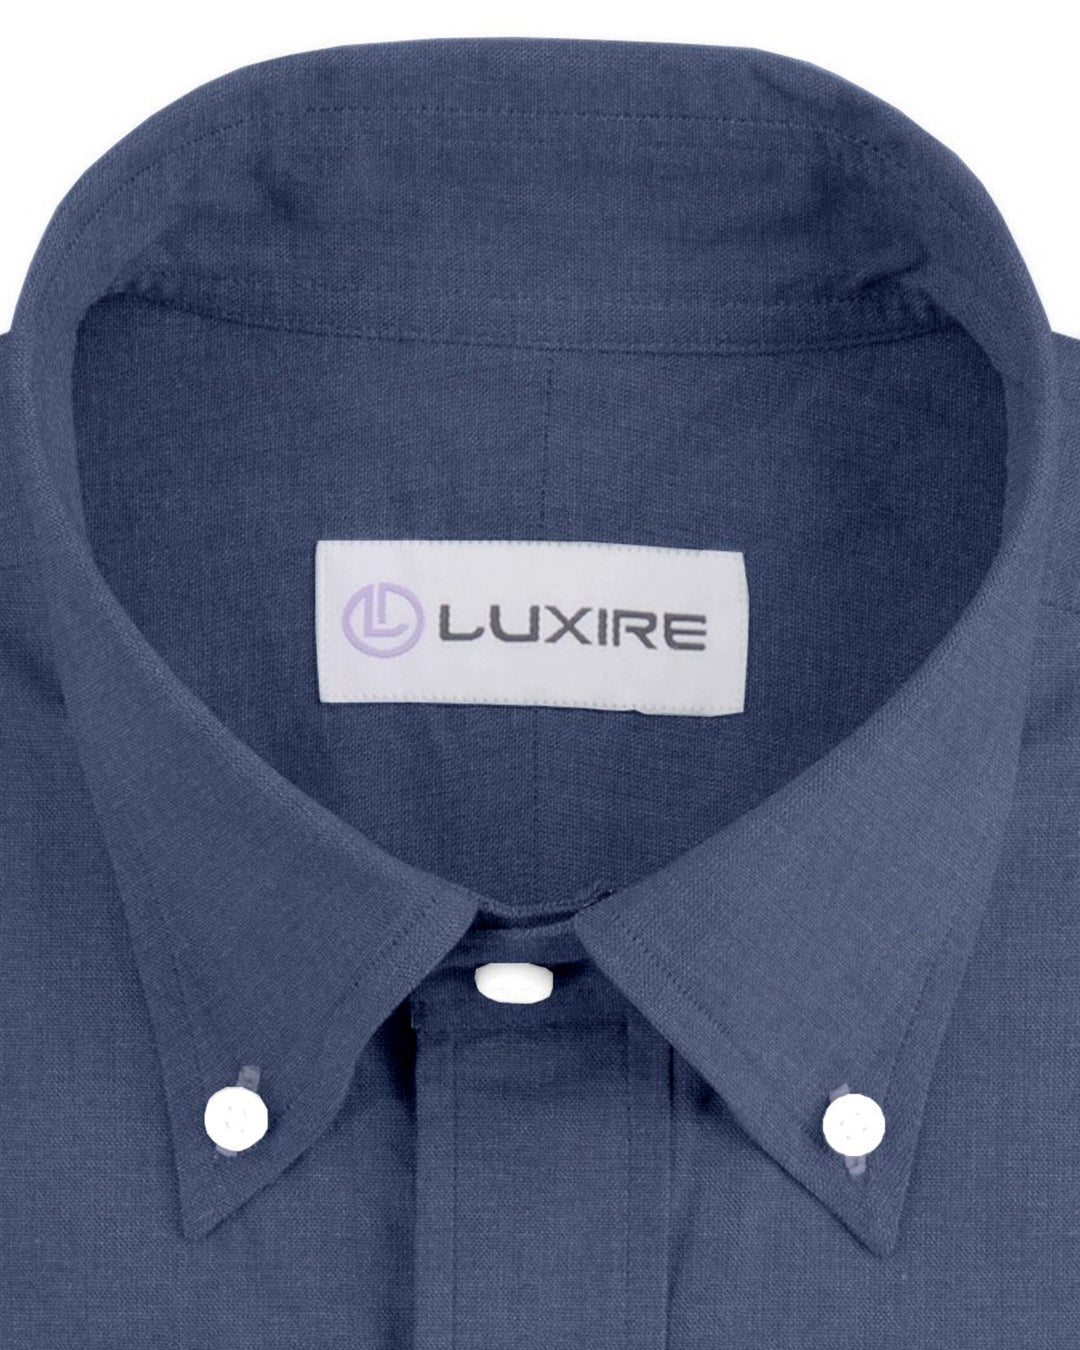 Collar of the custom linen shirt for men in indigo denim by Luxire Clothing